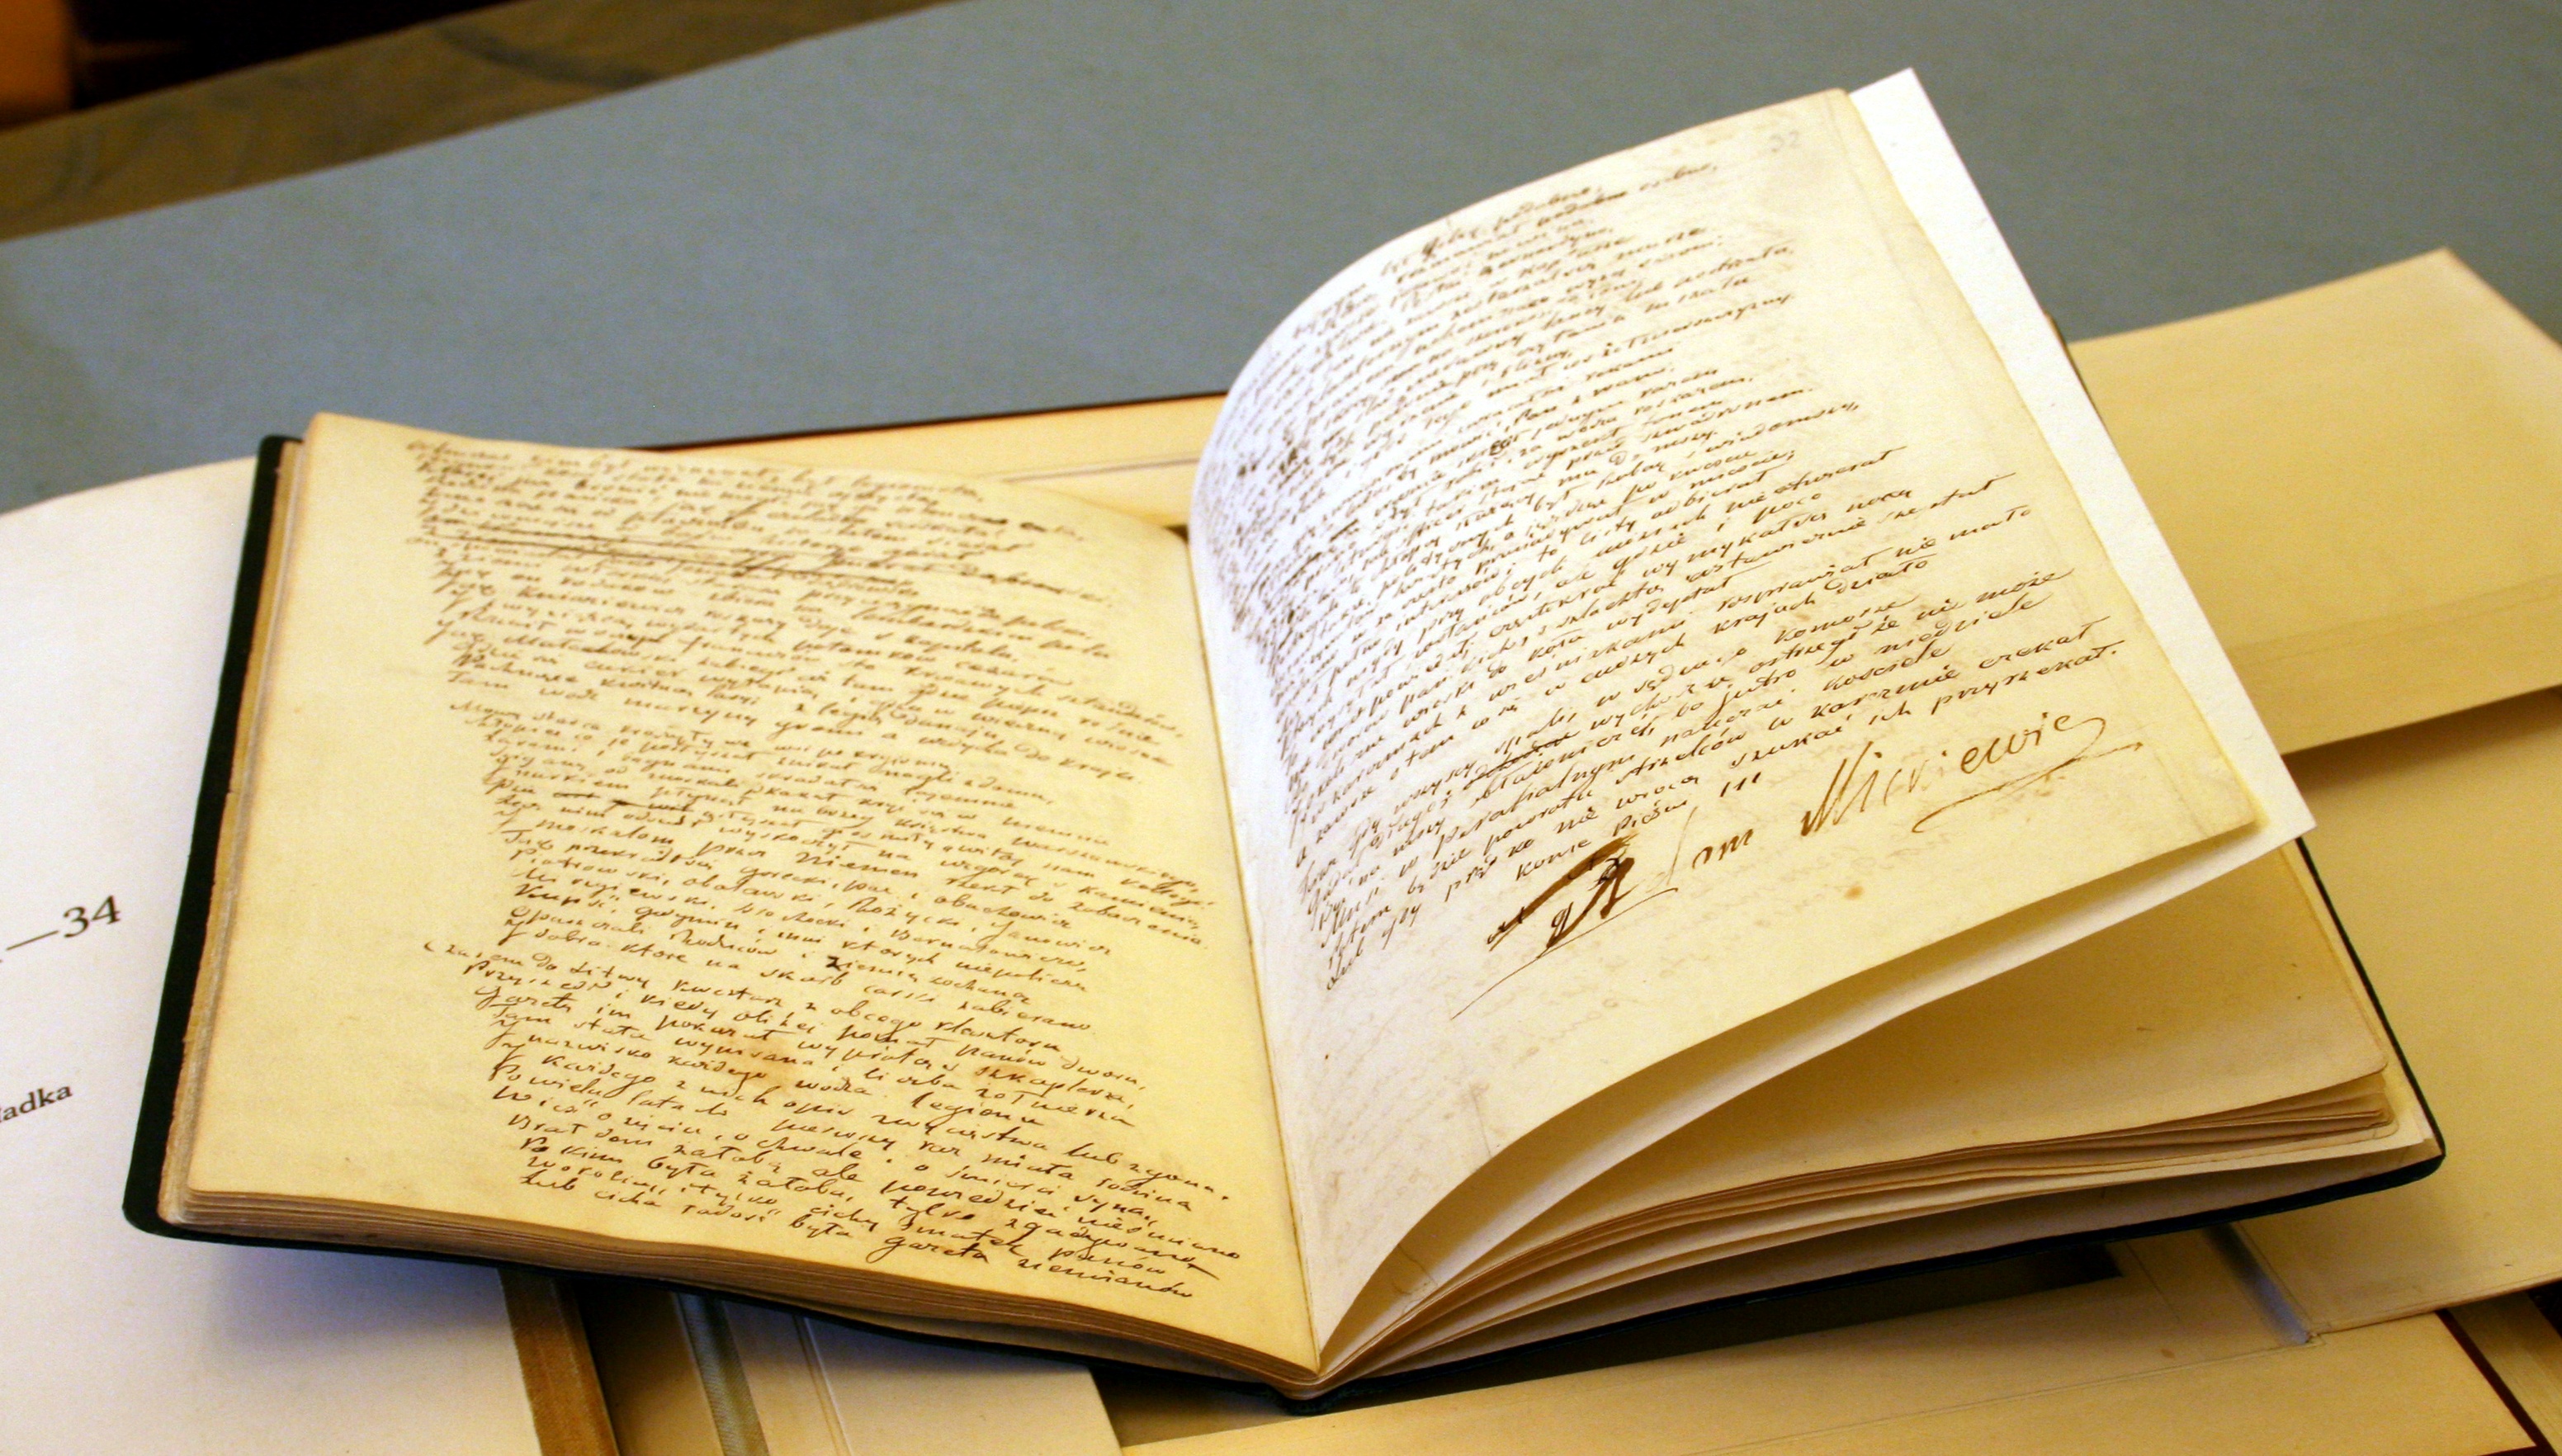 The manuscript of Pan Tadeusz held at Ossolineum in Wrocław. Credits: Pleple2000, CC BY-SA 4.0, via Wikimedia Commons